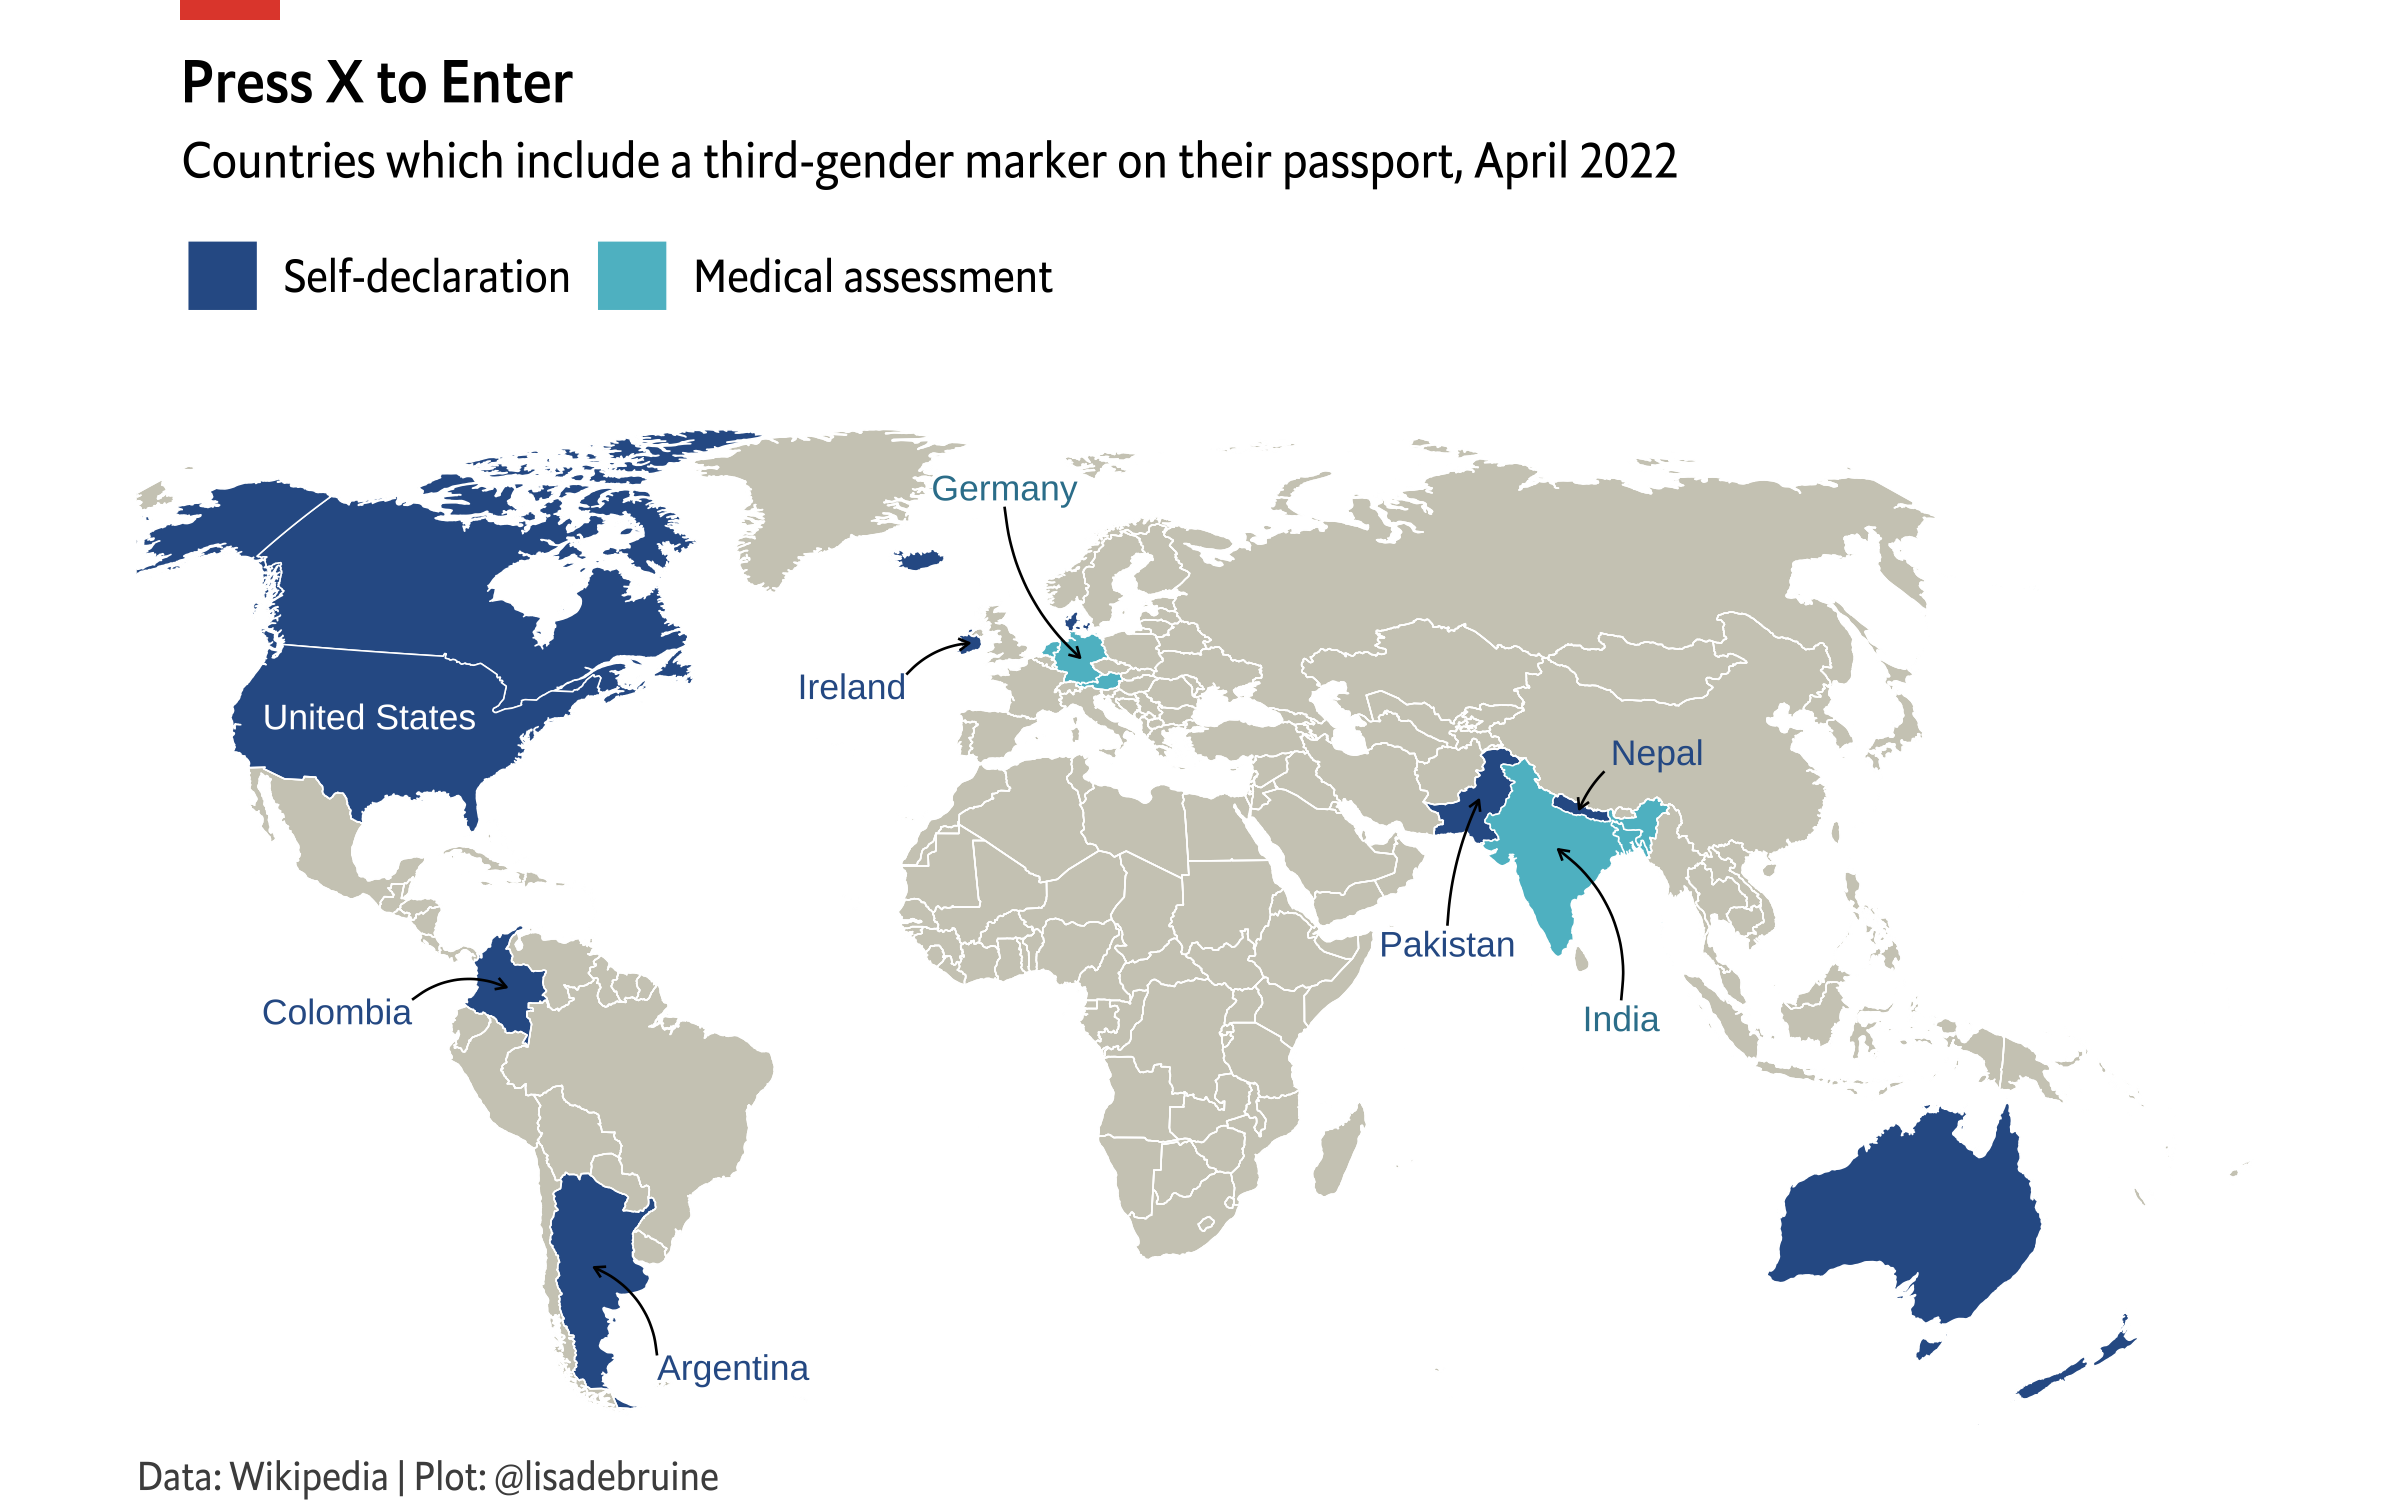 Countries which include a third-gender marker on their passport, April 2022 USA, Canada, Colombia, Argentina, Germany, Austria, Netherlands, Denmark, Ireland, Malta, Iceland, Austria, Australia, New Zealand, India, Bangladesh, Pakistan, Nepal. Plot is in the visual style of plots from The Economist.